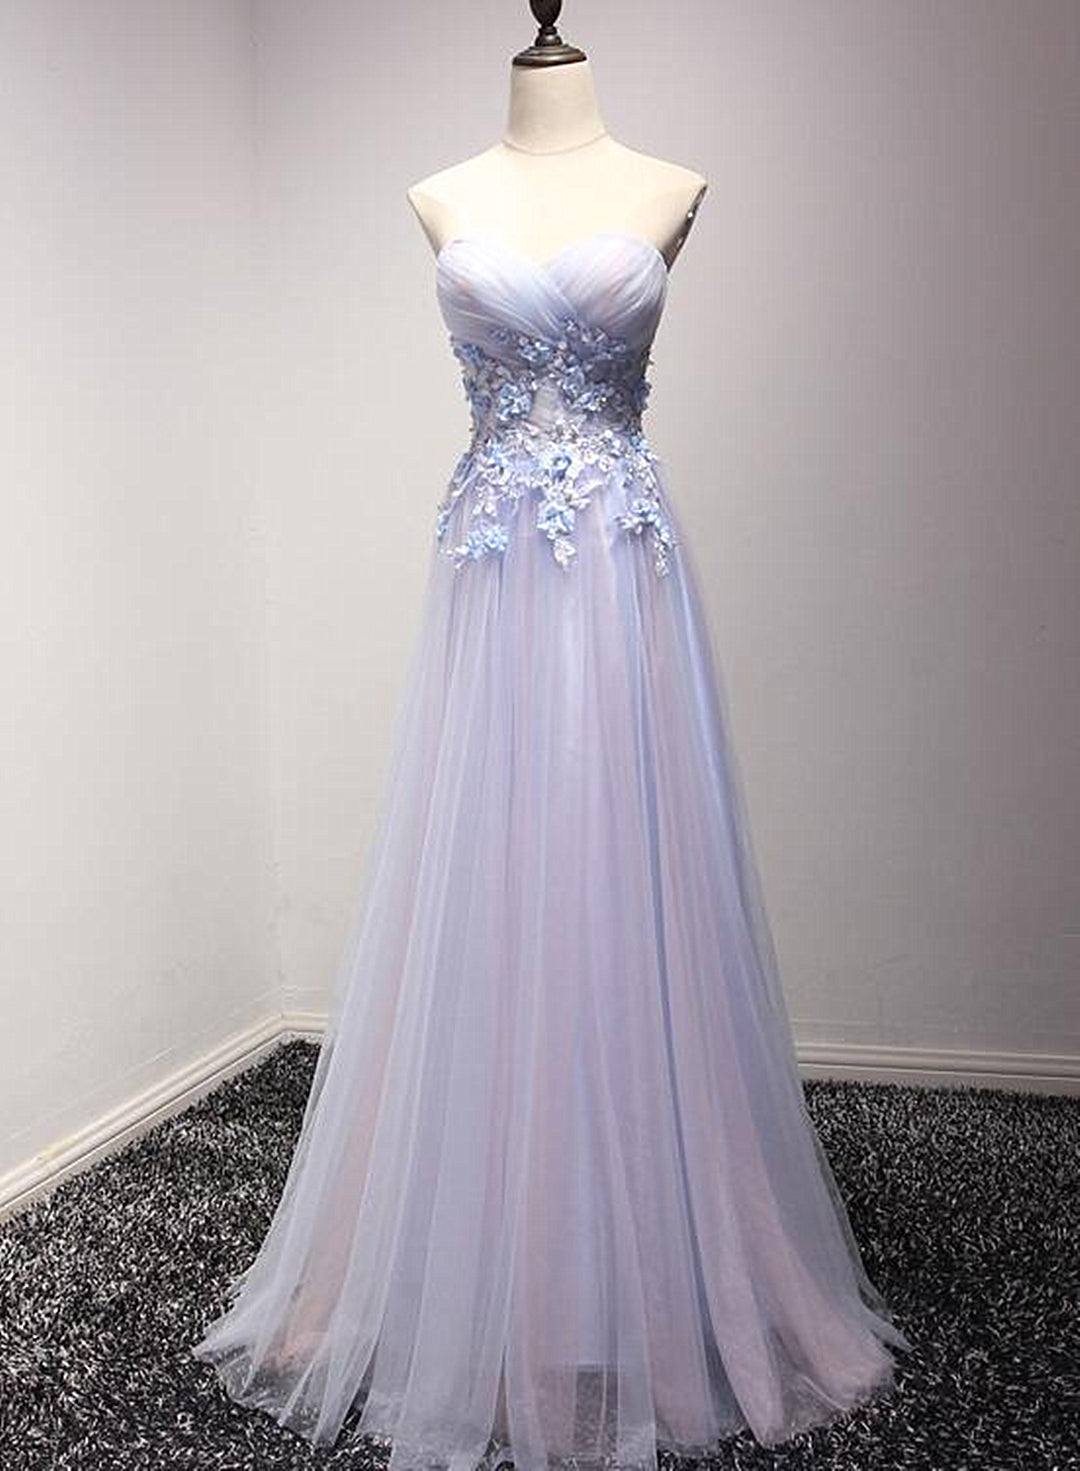 Light Blue and Pink Charming Sweetheart Lace Party Dress , Formal Dress , Formal Gowns